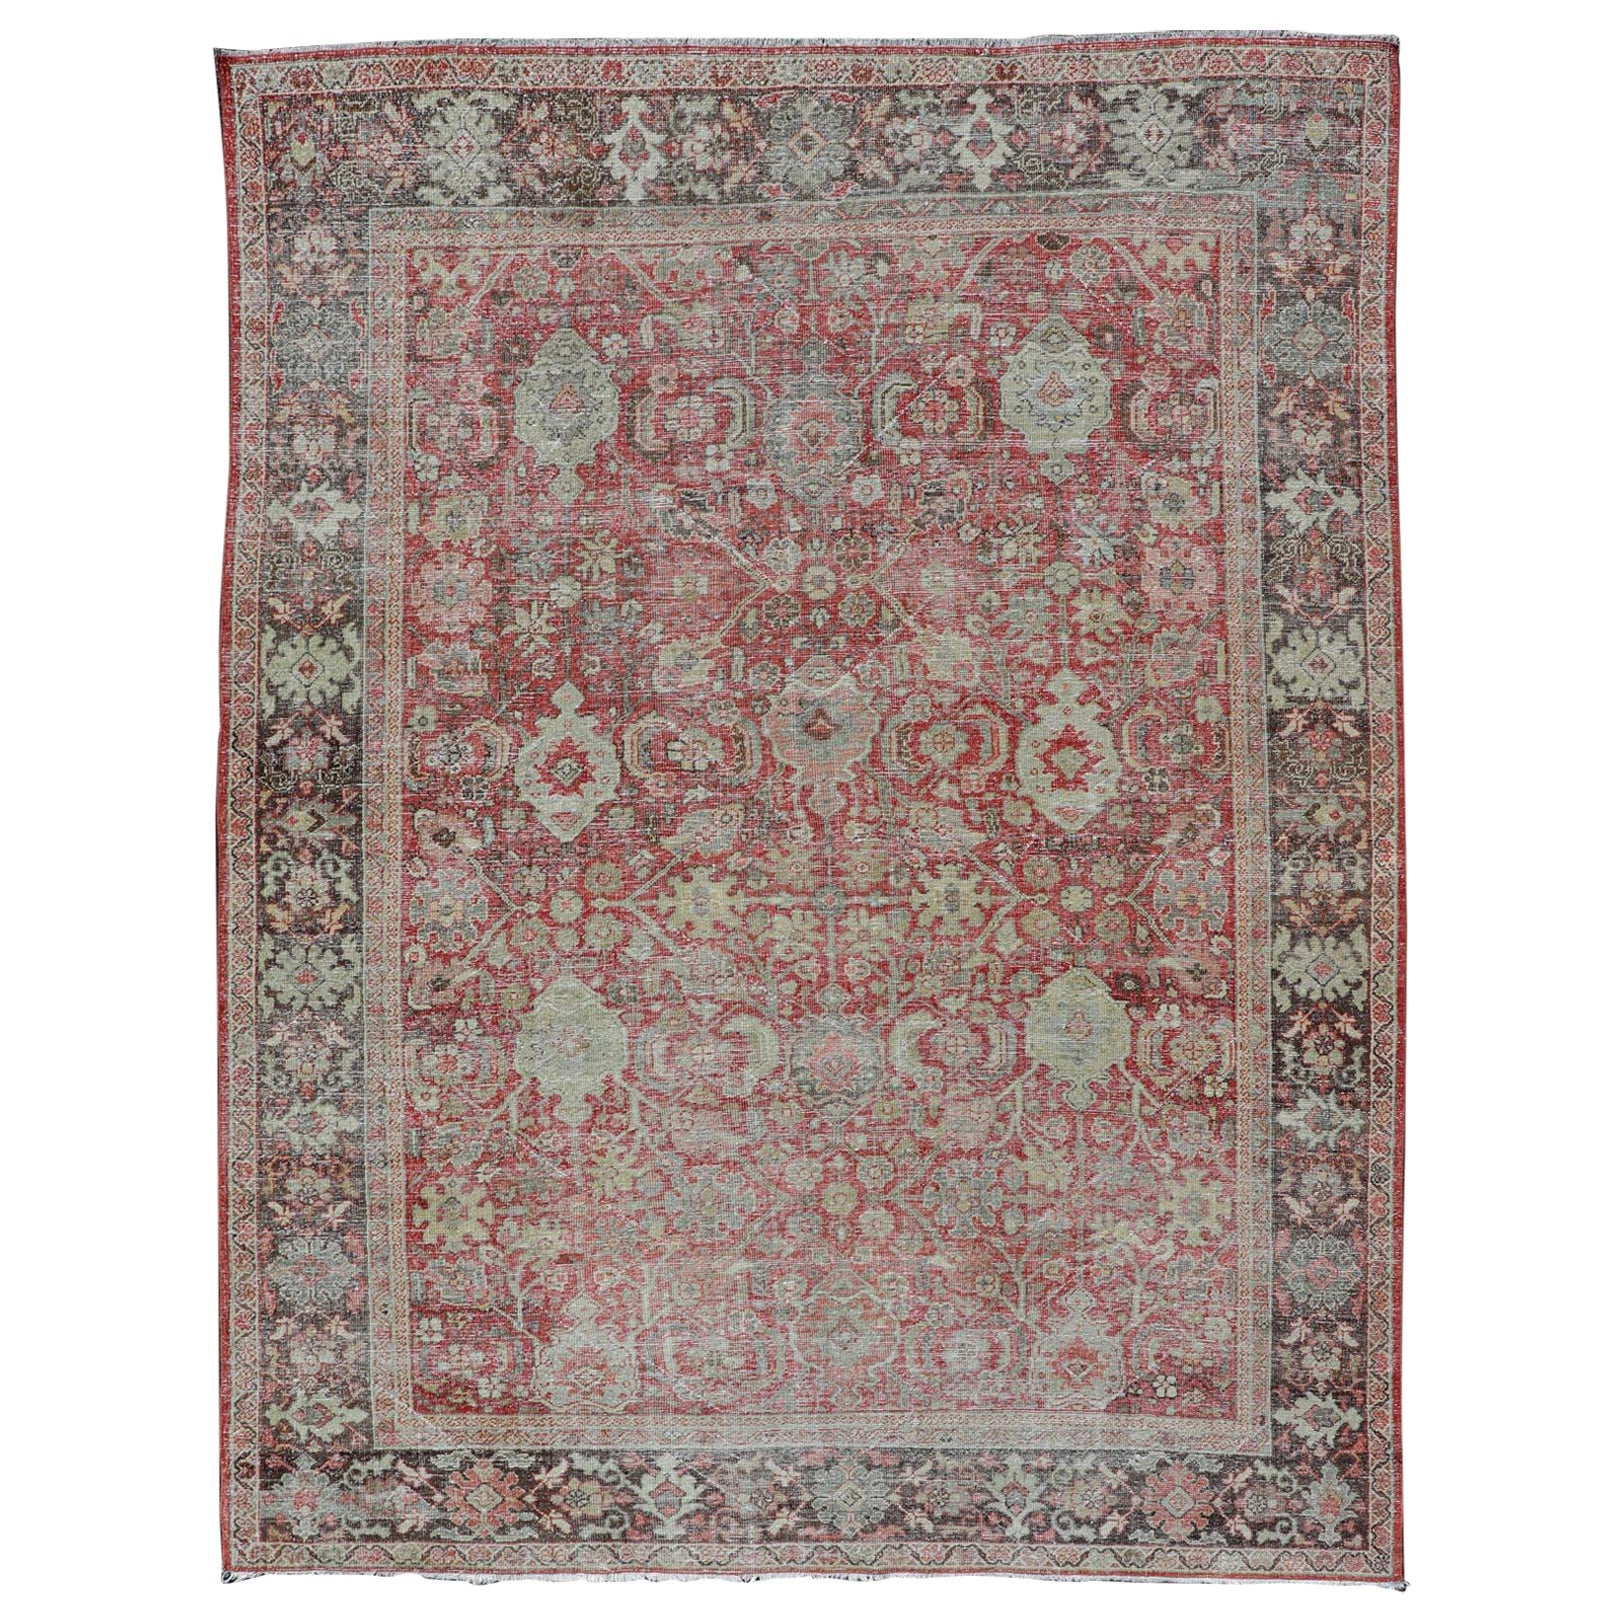 Antique Persian Colorful Mahal Rug with All over Floral Design on a Red Field  For Sale